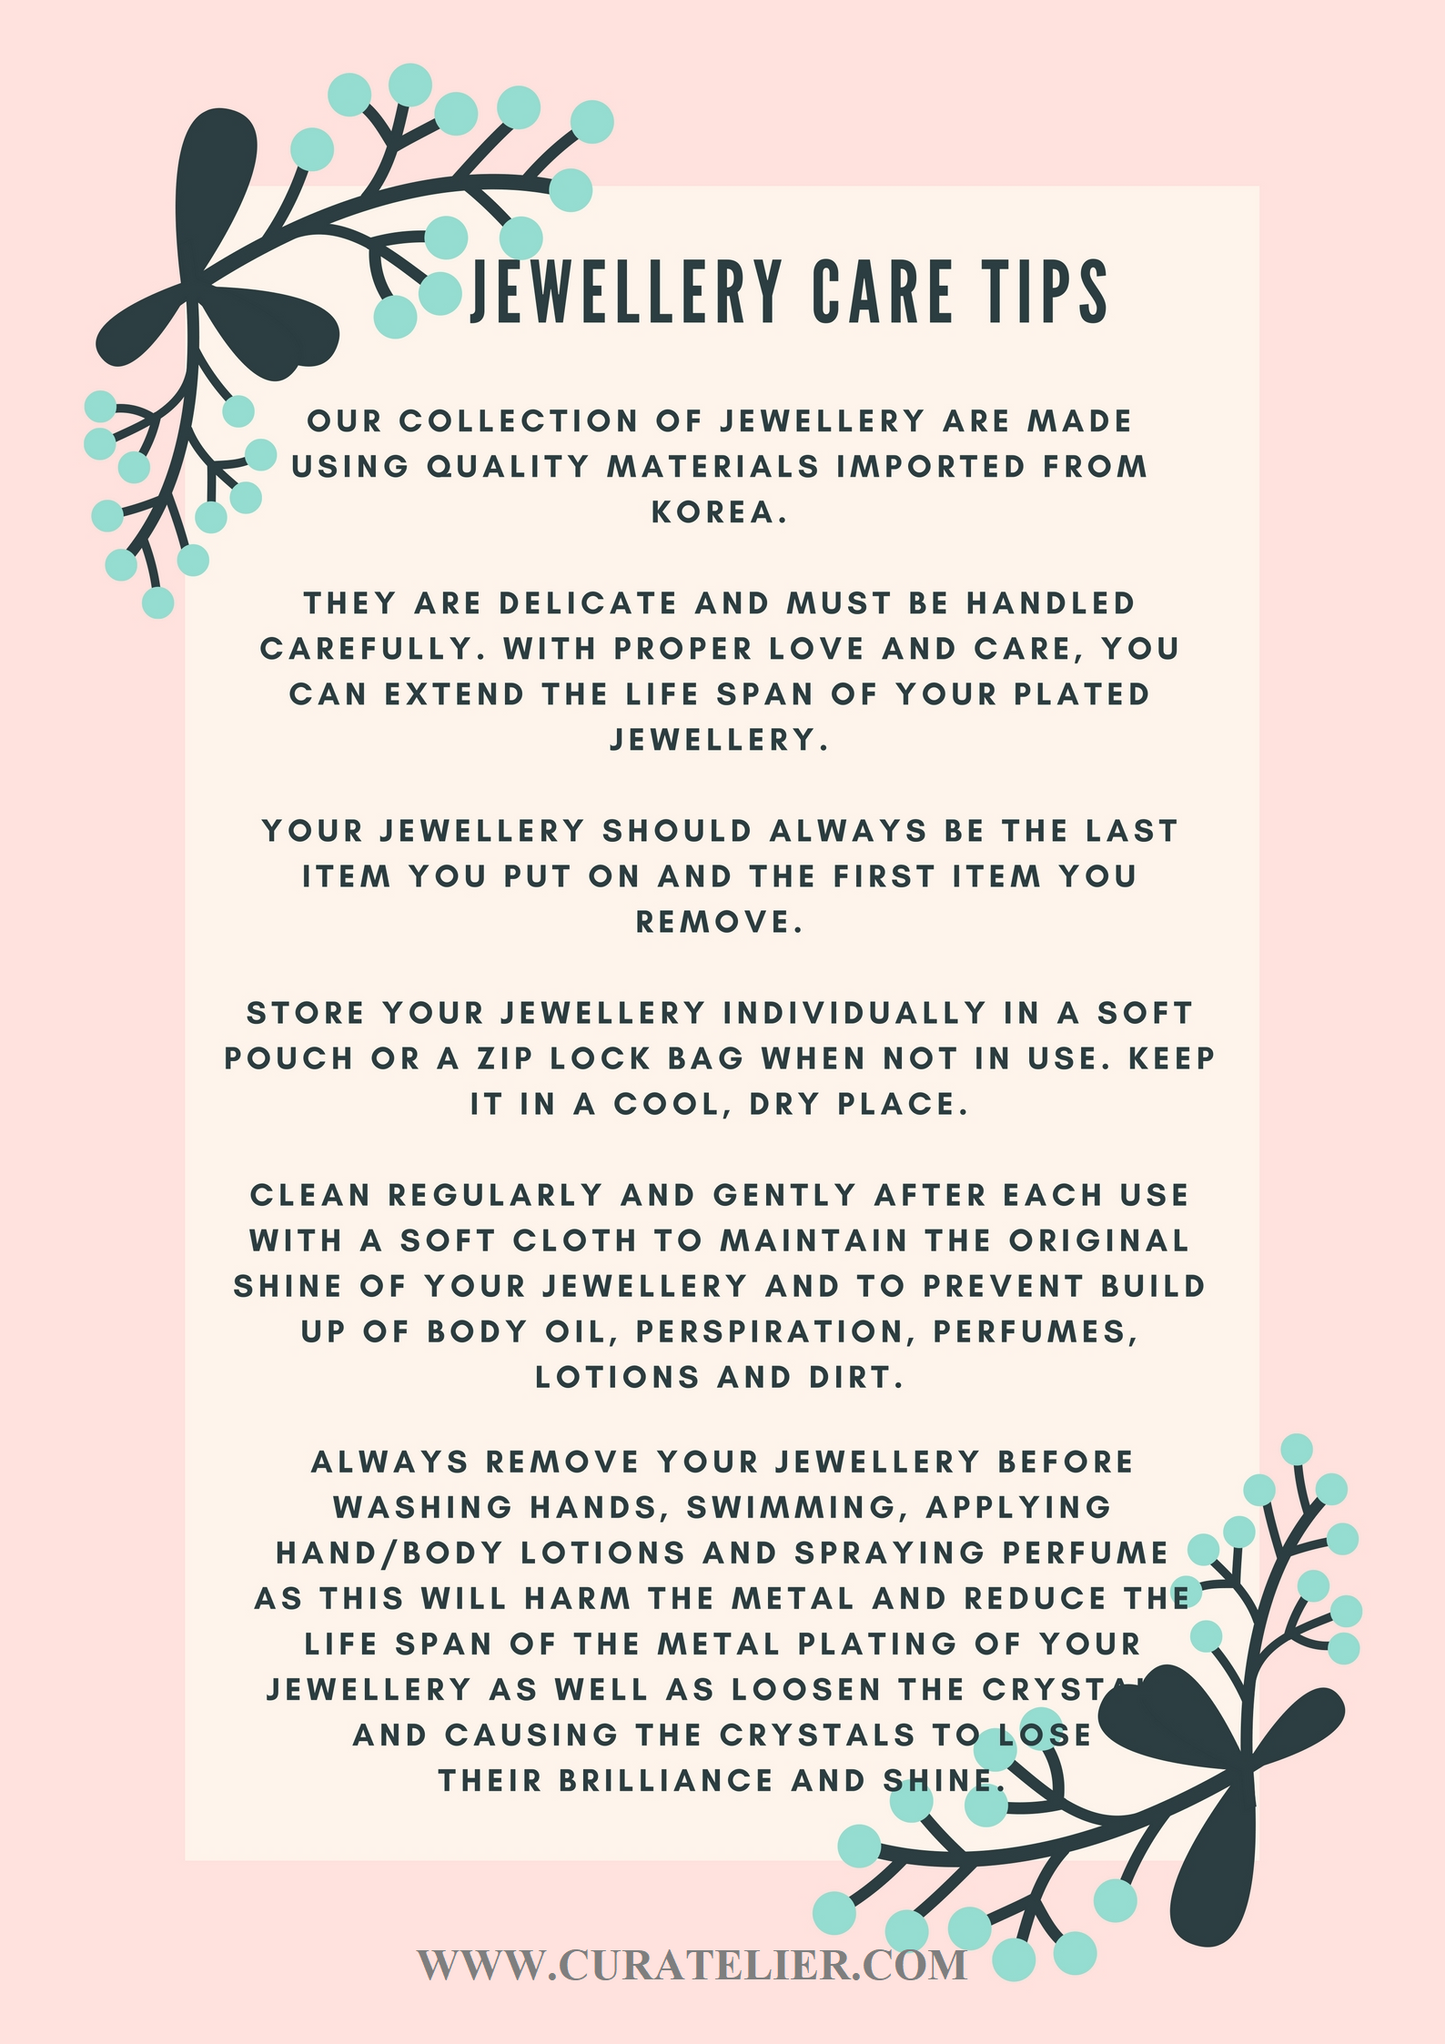 Curatelier Jewellery Care Tips